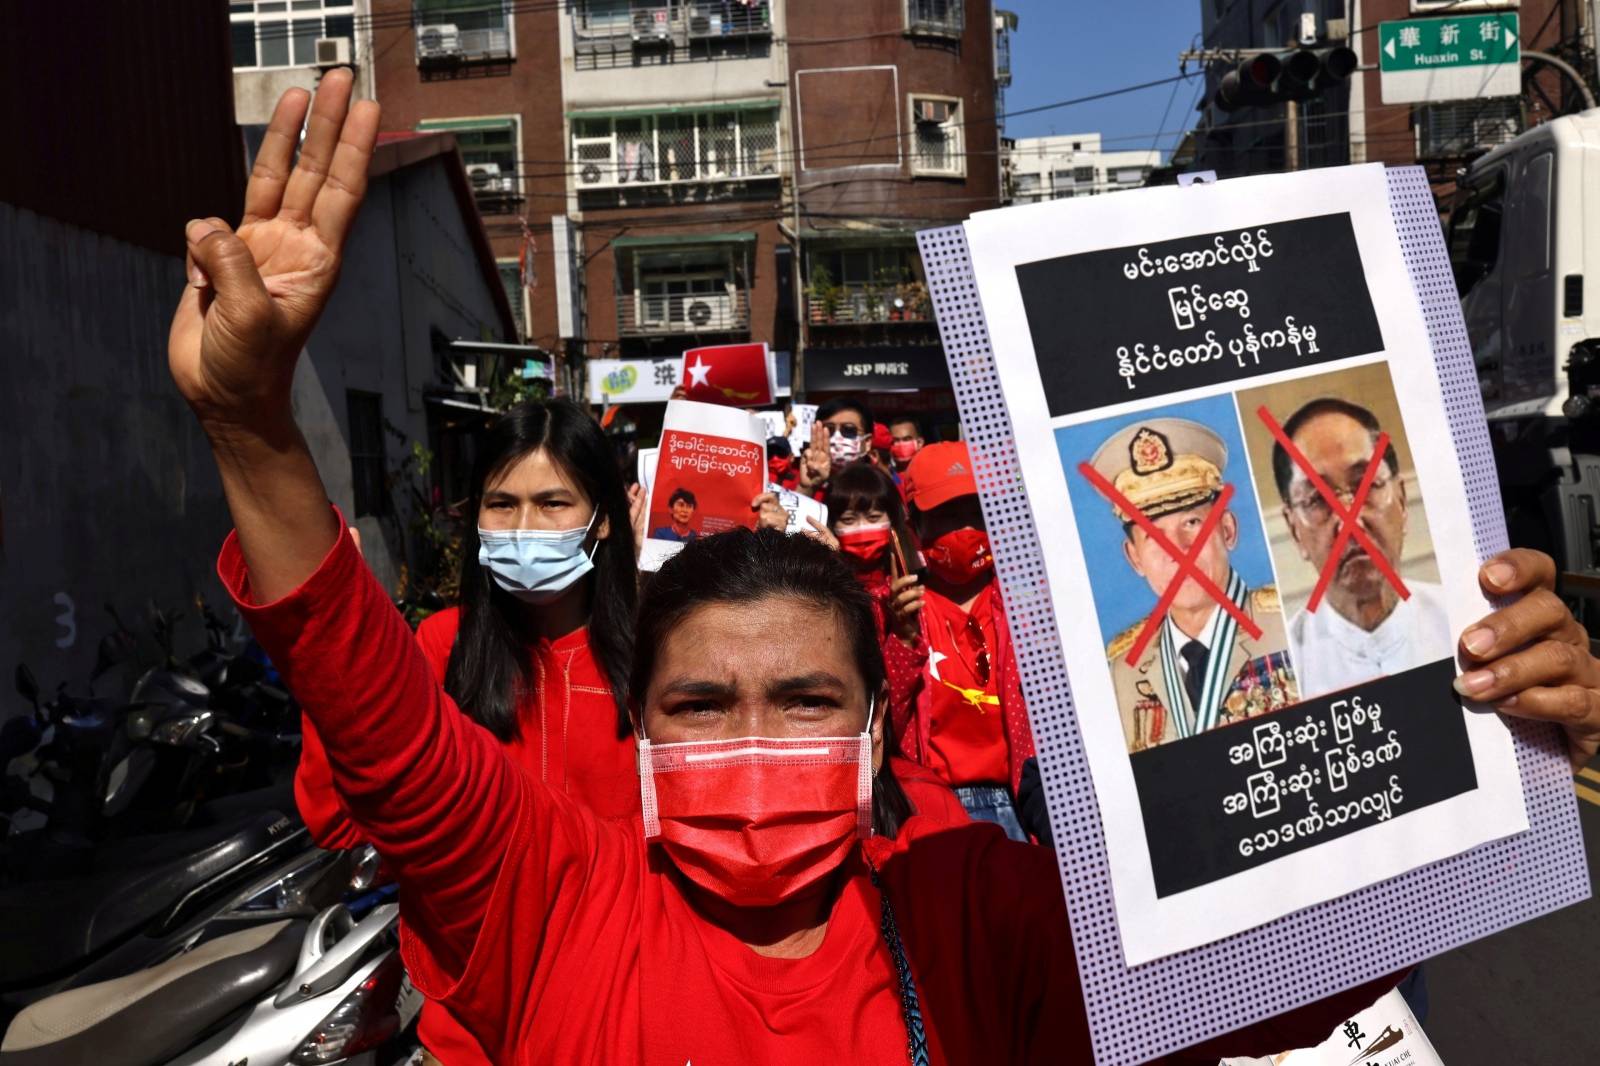 Members of the Burmese community in Taipei protest against the Myanmar military coup in Little Burma, home to many of Taiwan's  Burmese immigrants, in Taipei